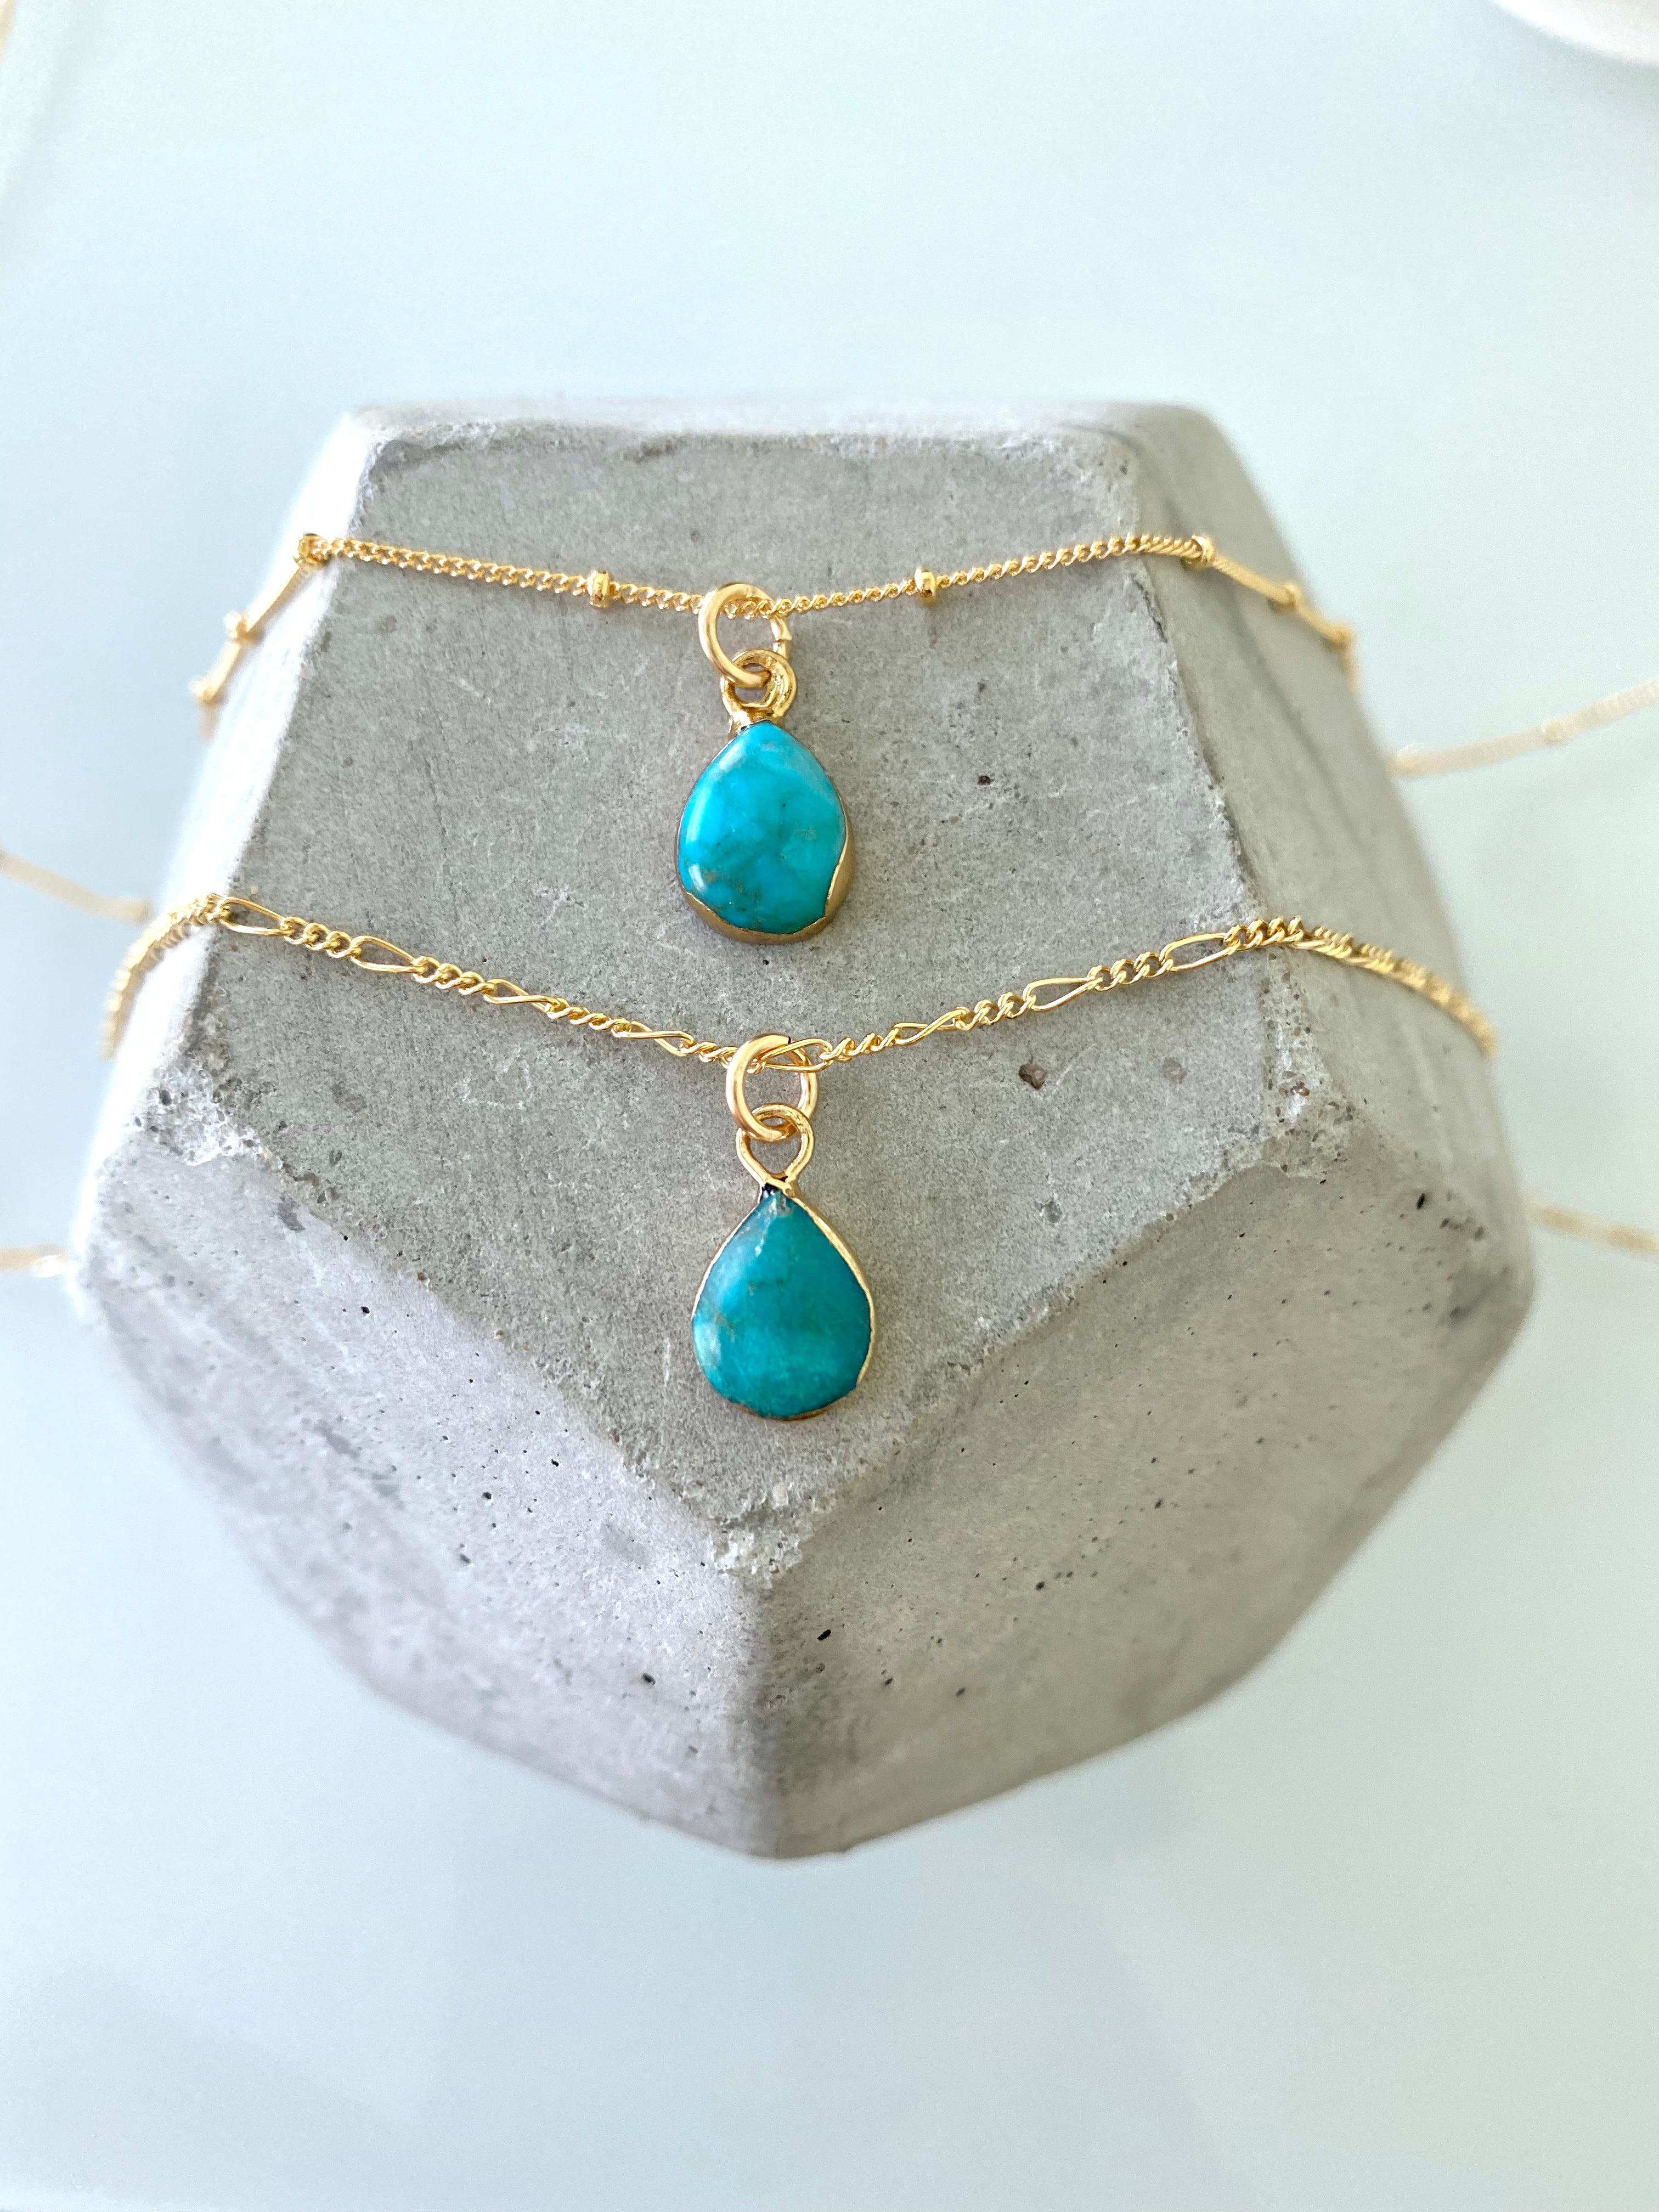 Dainty Turquoise Teardrop Pendant Necklace - Gold Filled Chain - December Birthstone Jewelry